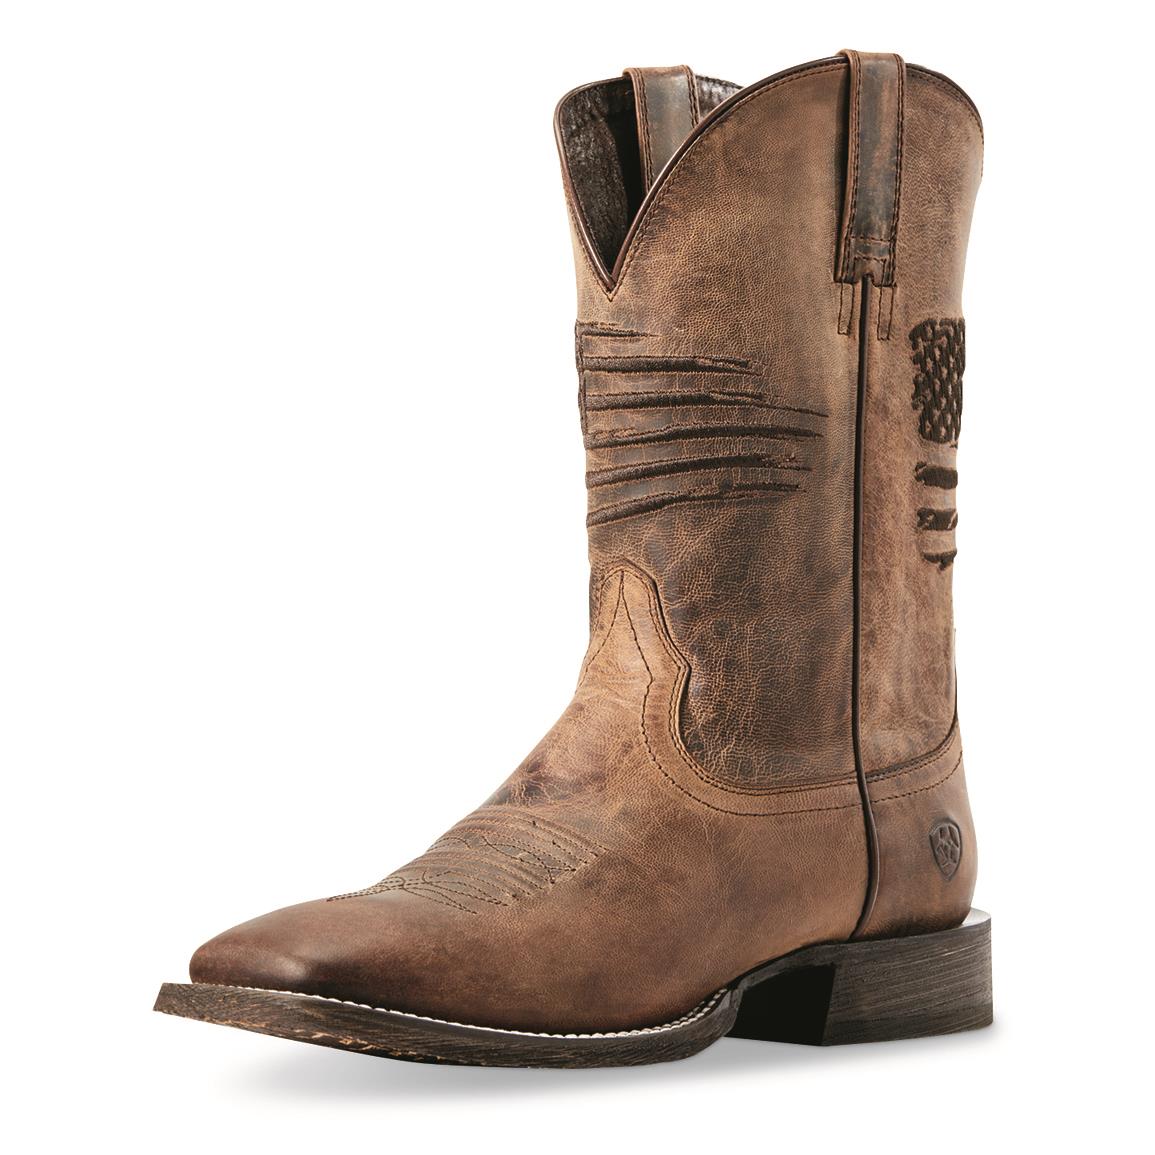 Ariat Men's Circuit Patriot Western Boots, Weathered Tan